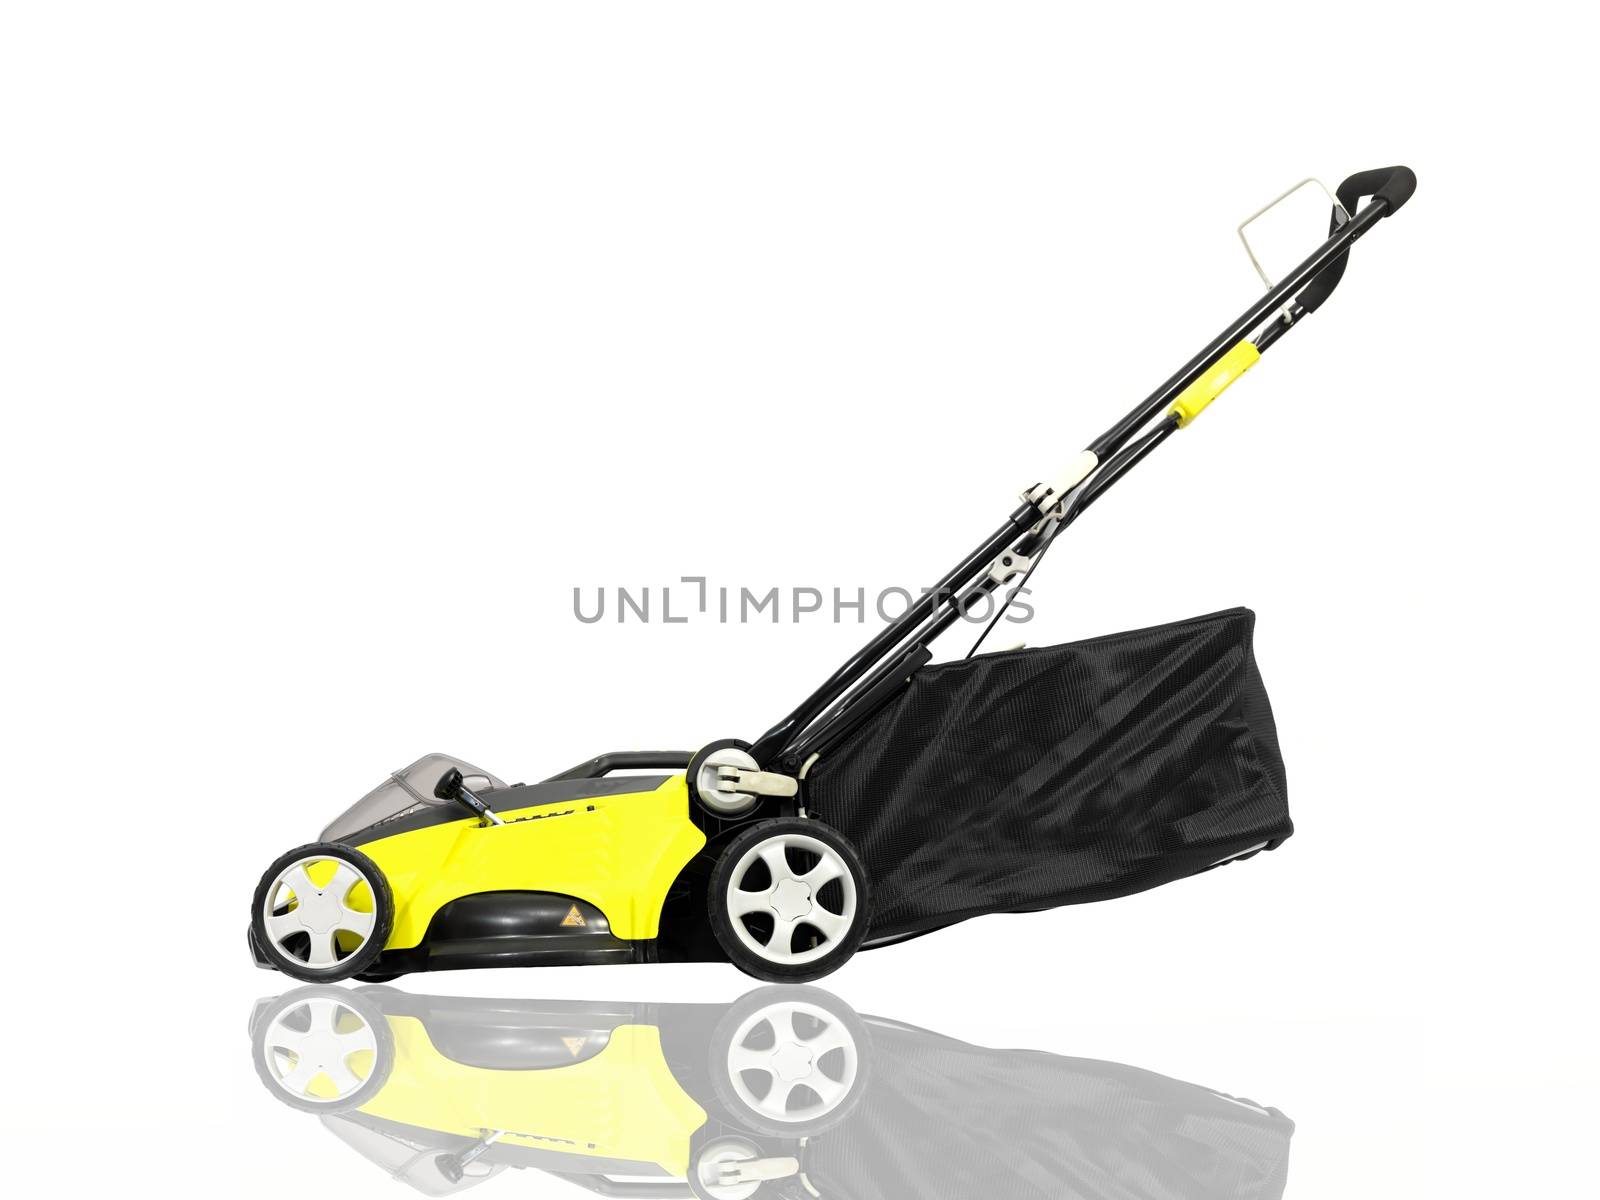 A rechargable lawn mower on a white background